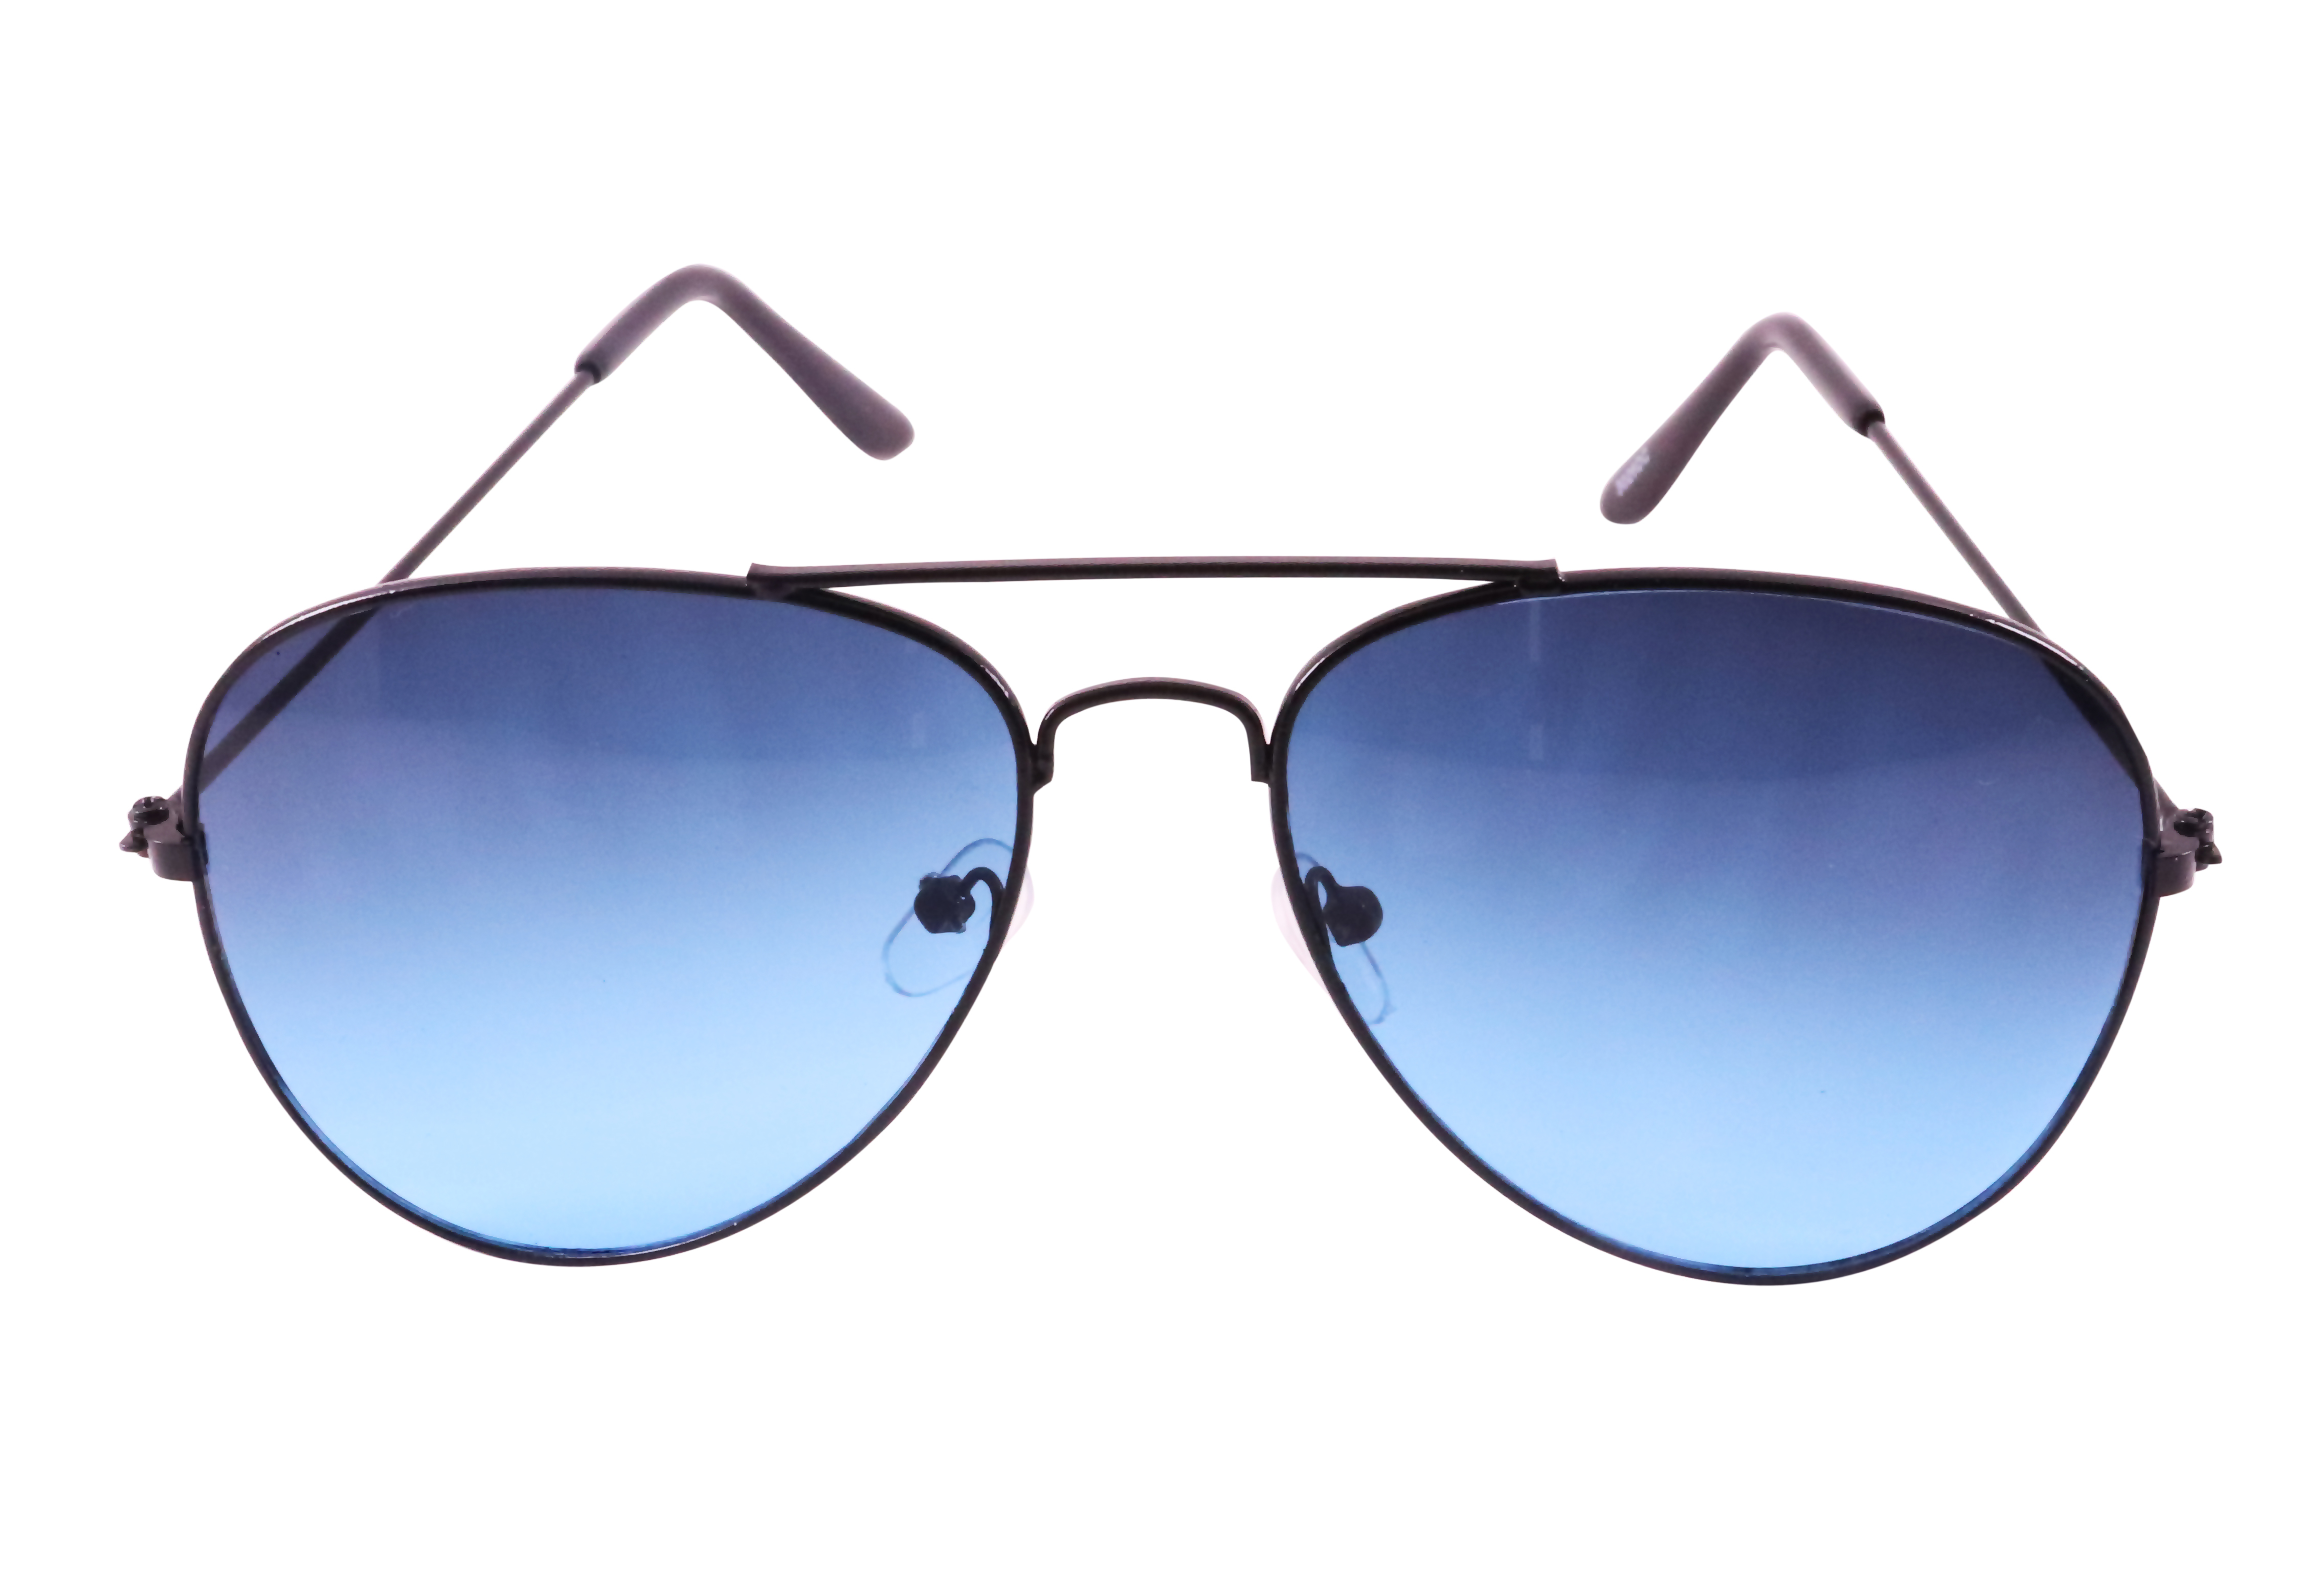 Buy Pack of 4 Aviator Style Sunglasses Online @ ₹2499 from ShopClues